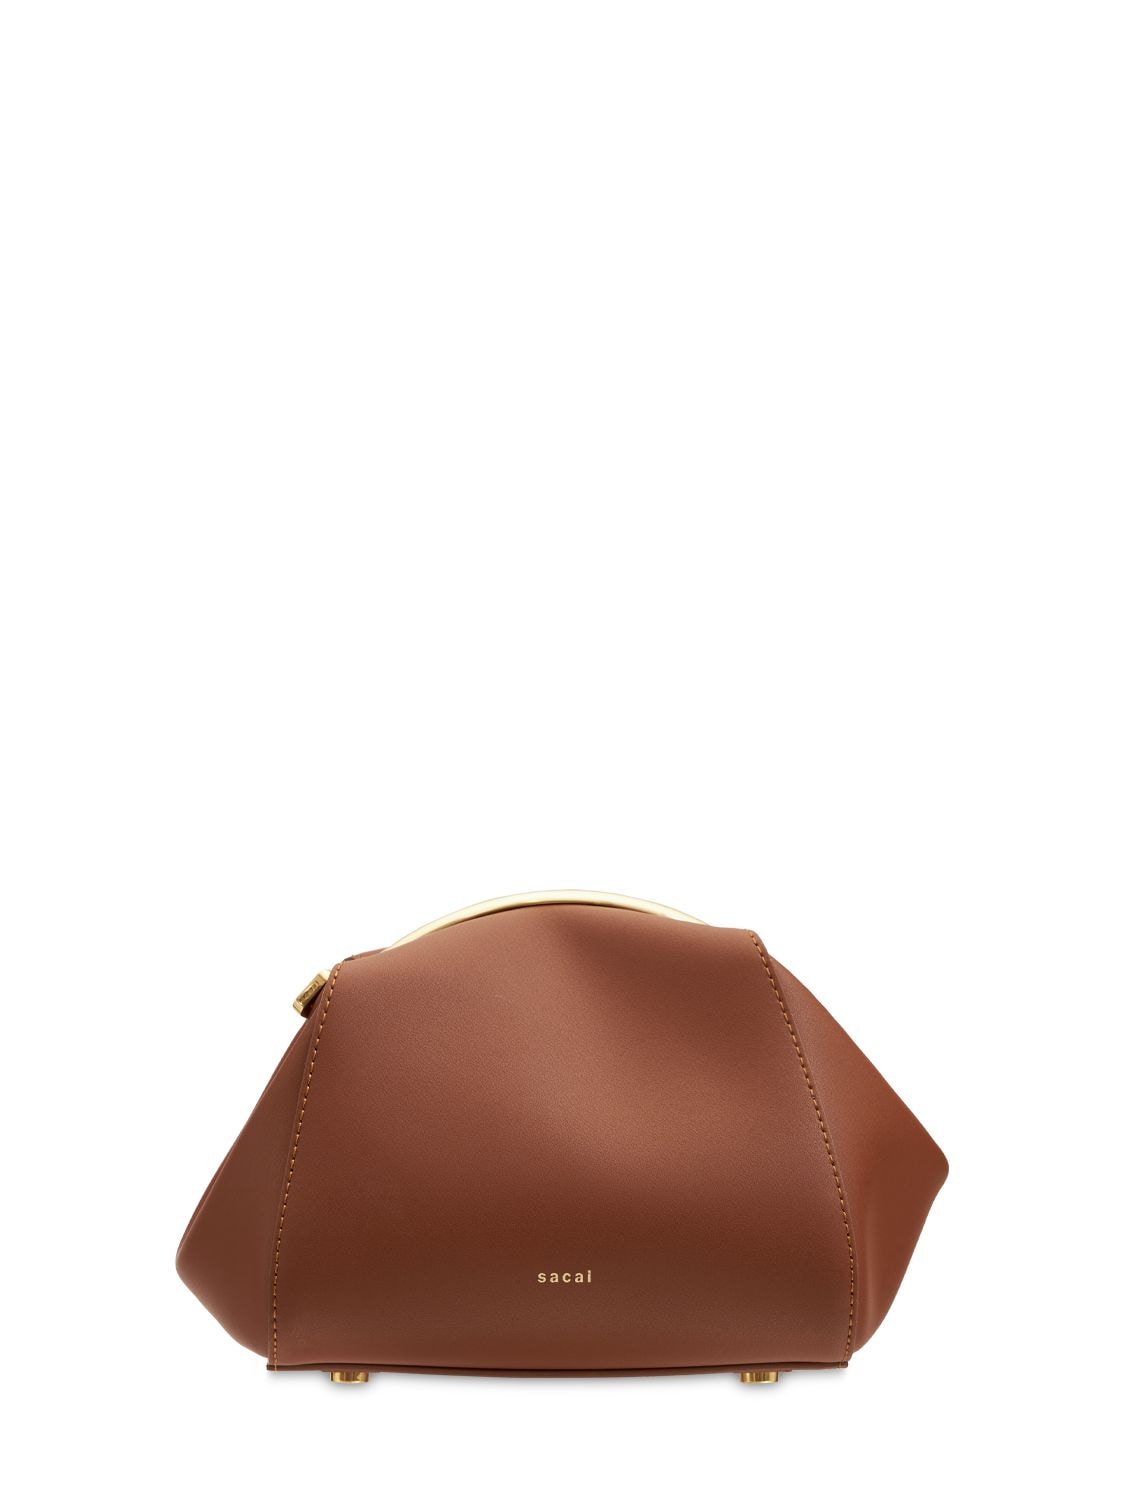 Sacai Small Pursket Leather Top Handle Bag In Brown